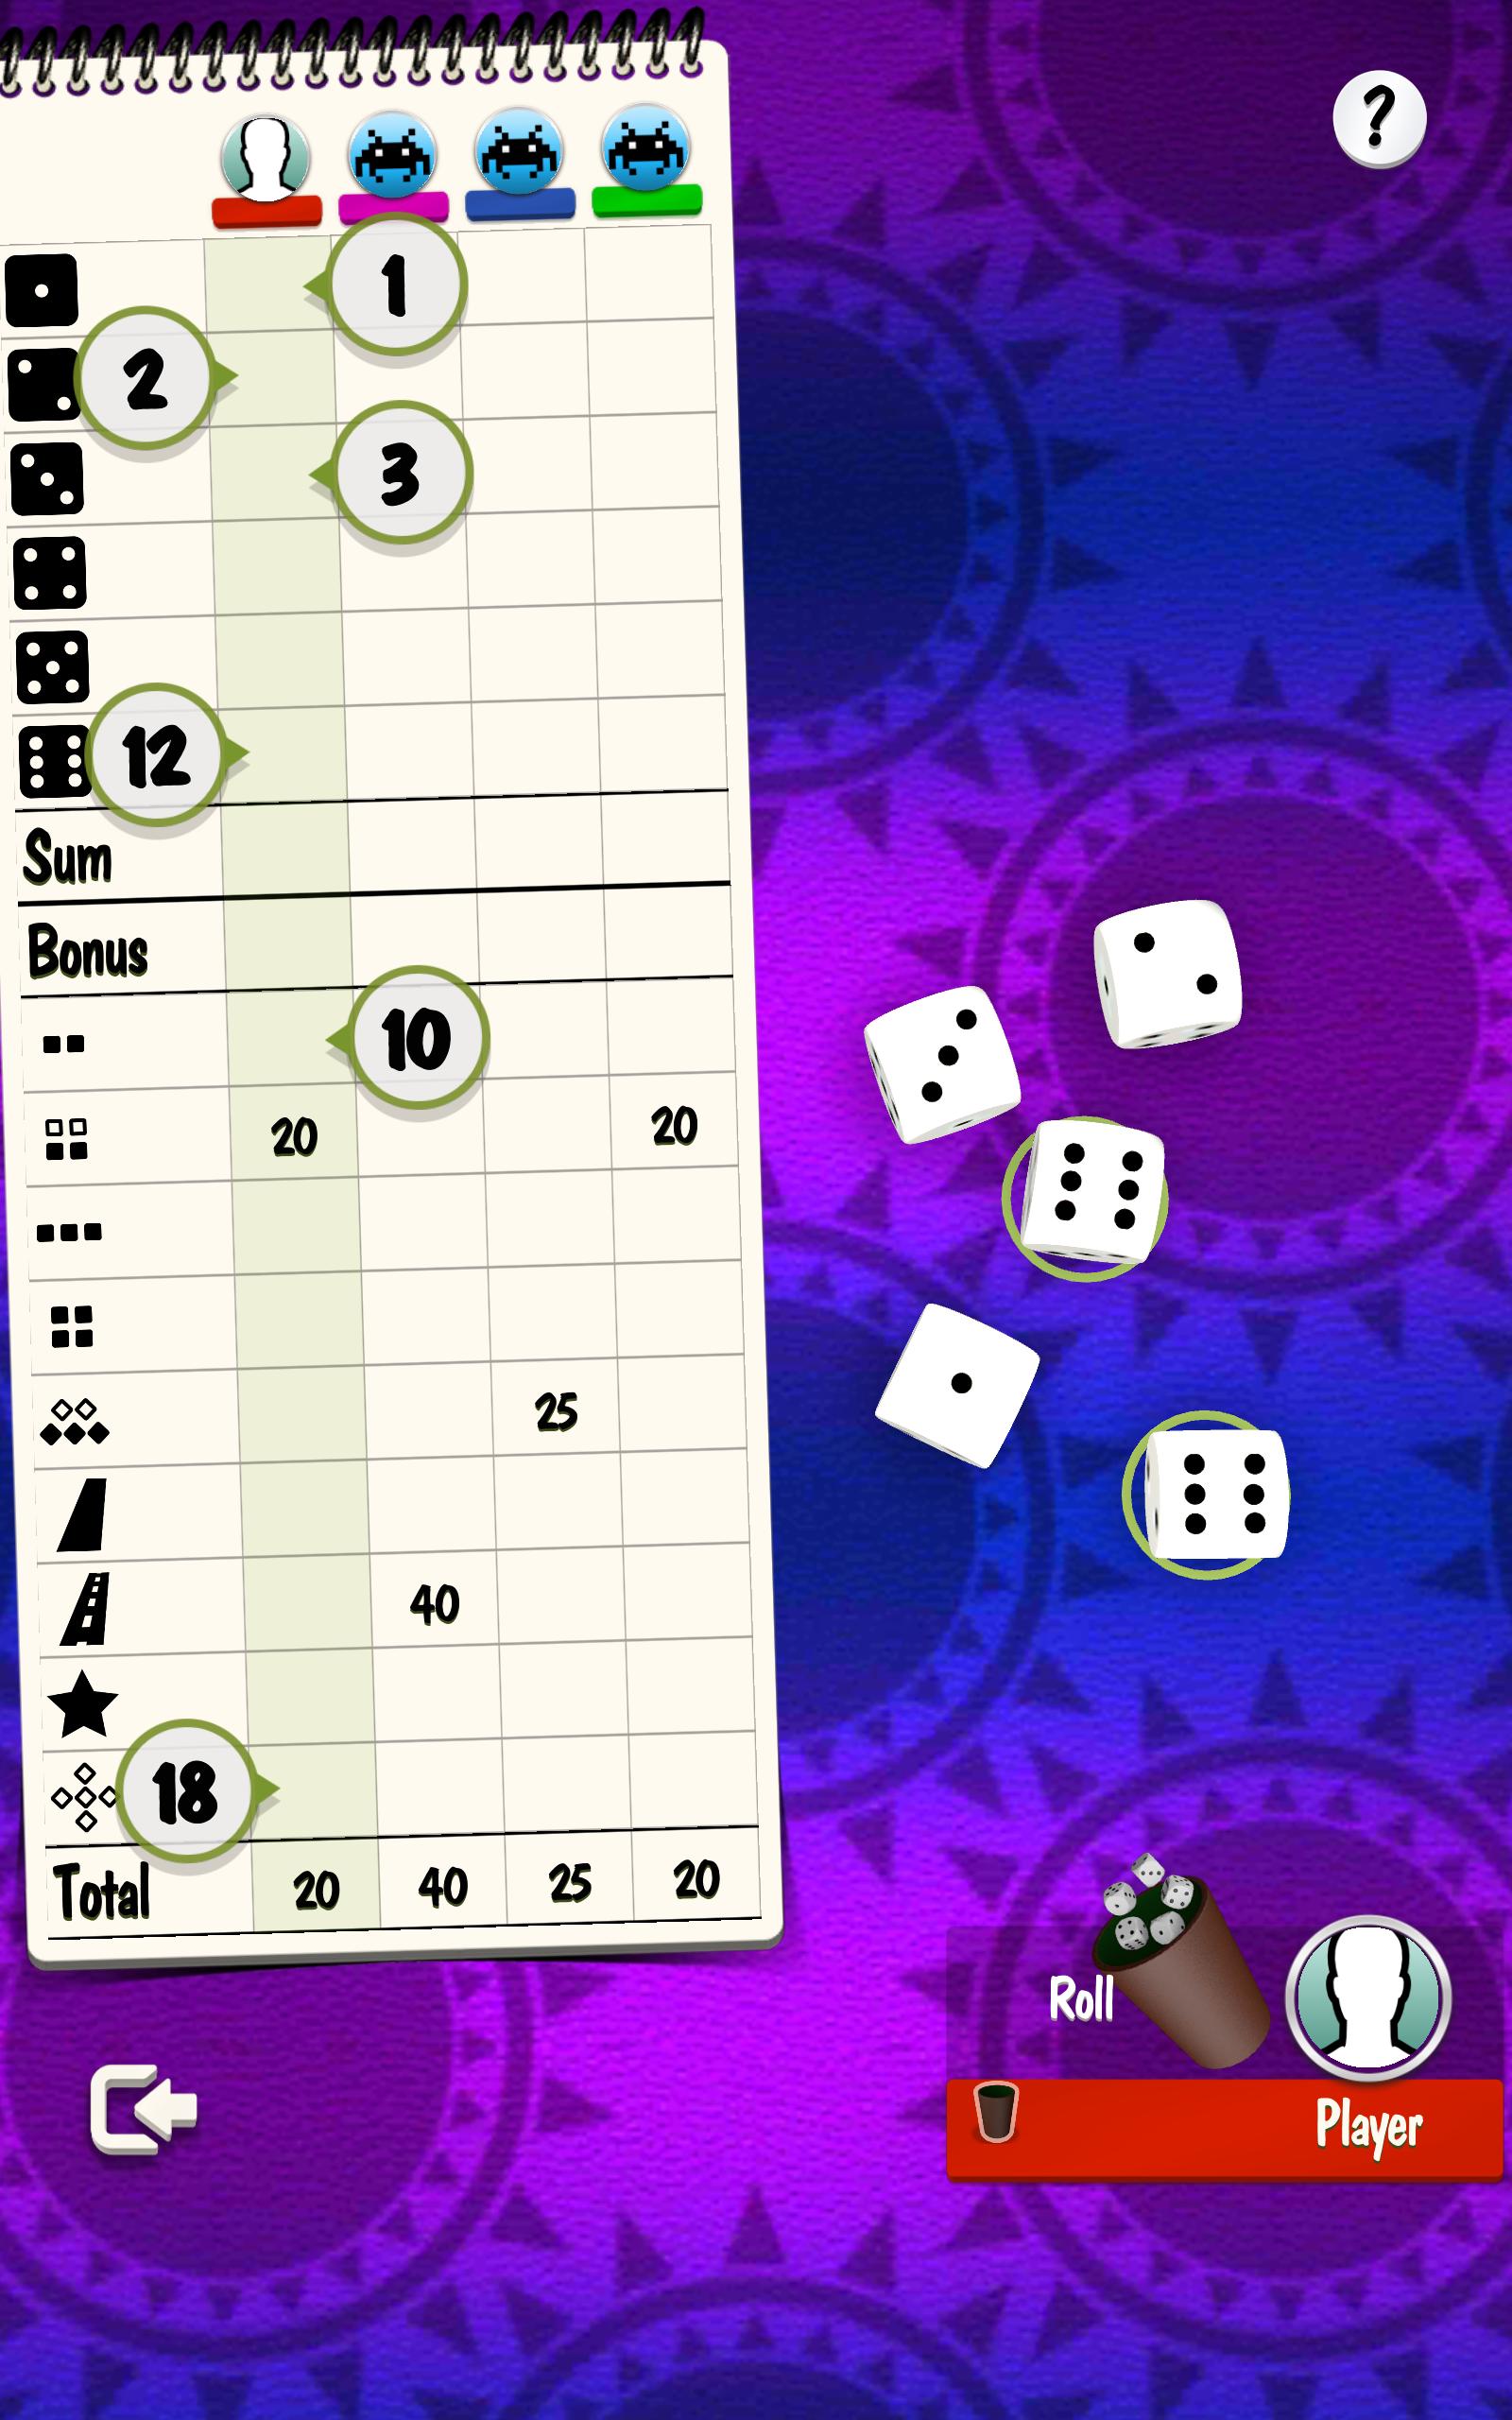 Yatzy Offline and Online - free dice game 3.3.4 Screenshot 9